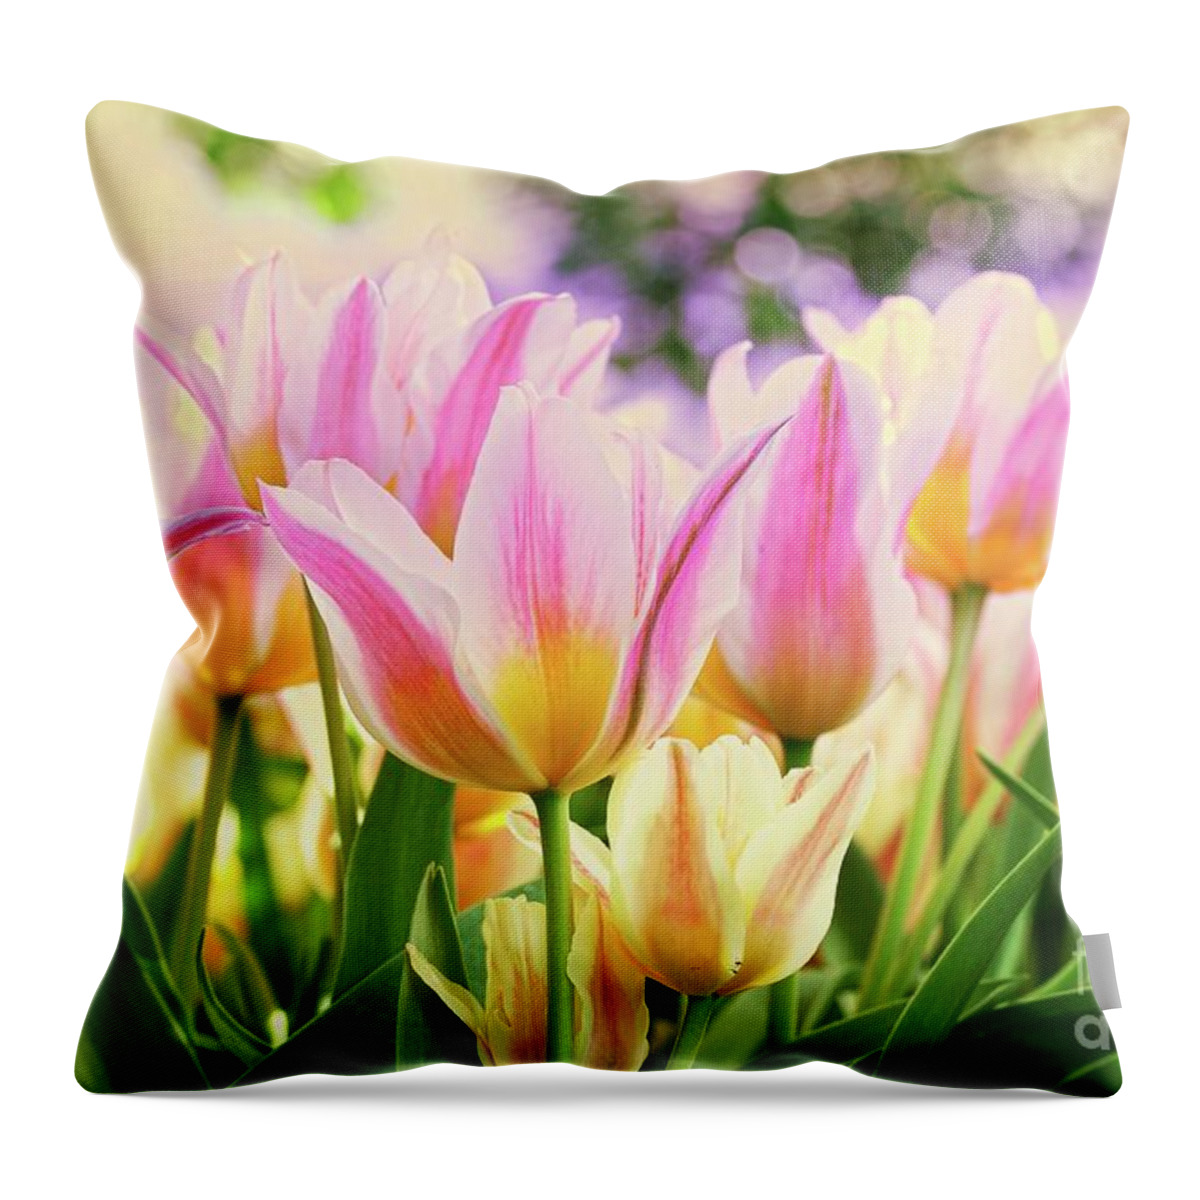 Flowers Throw Pillow featuring the photograph Spring Beauty by Elaine Manley